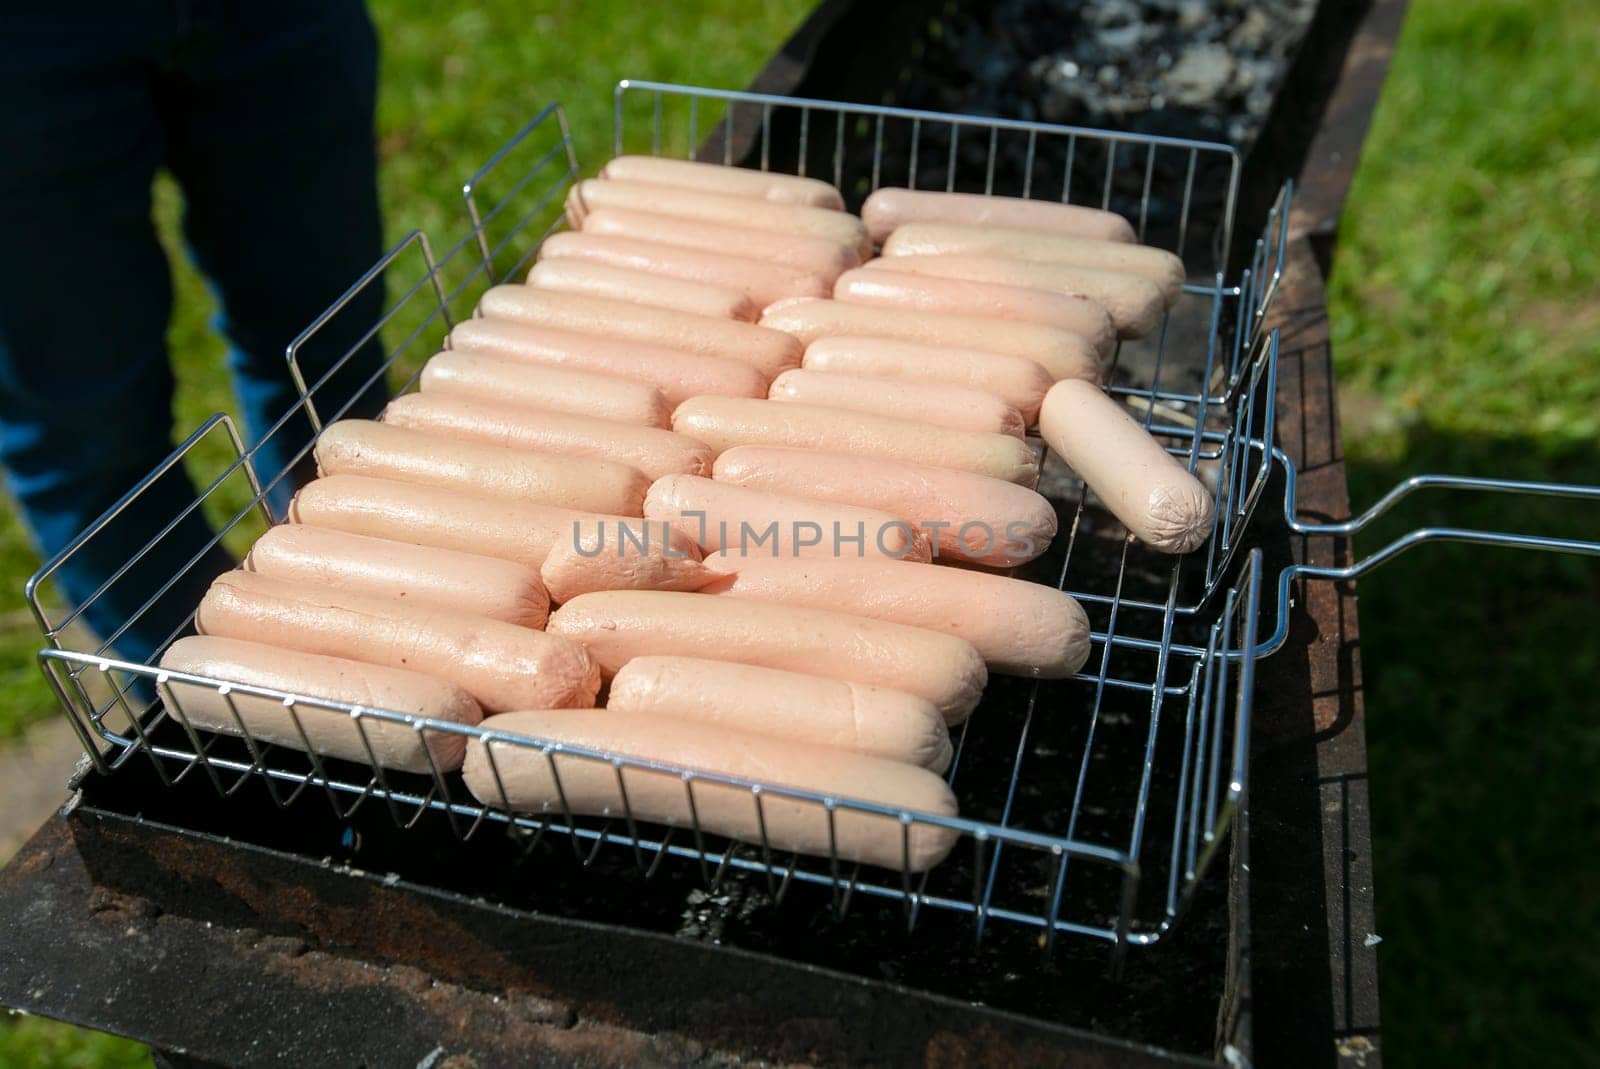 A lot of sausages are grilled on a barbecue grill for a buffet table.